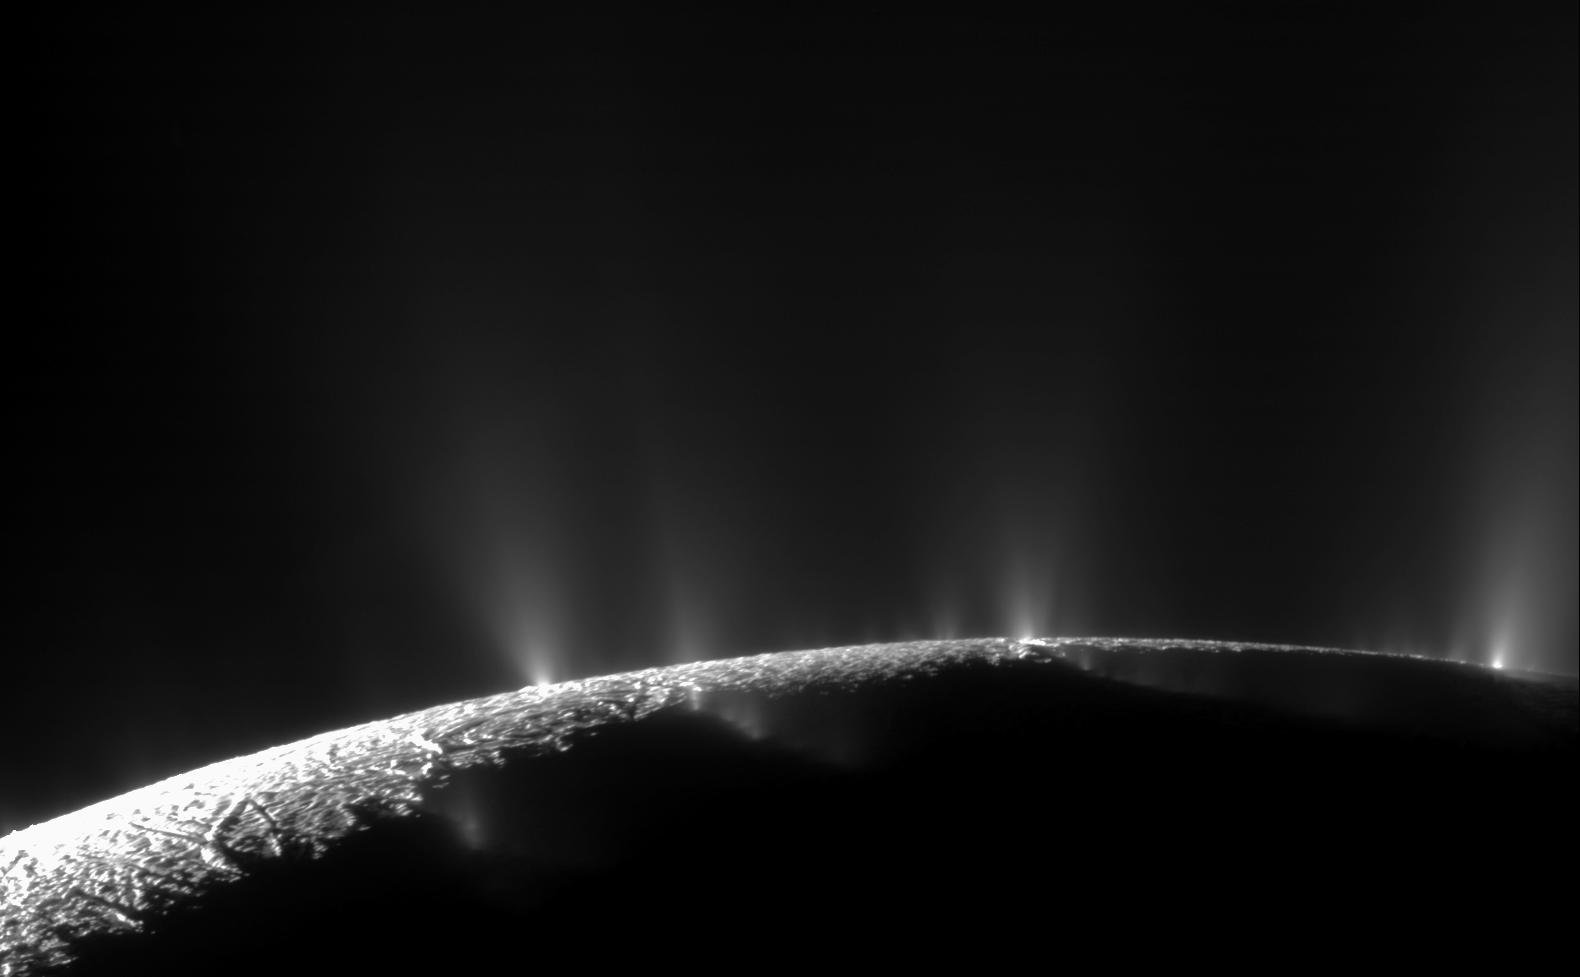 NASA: Life Signs Could Survive Near Surfaces of Enceladus and Europa